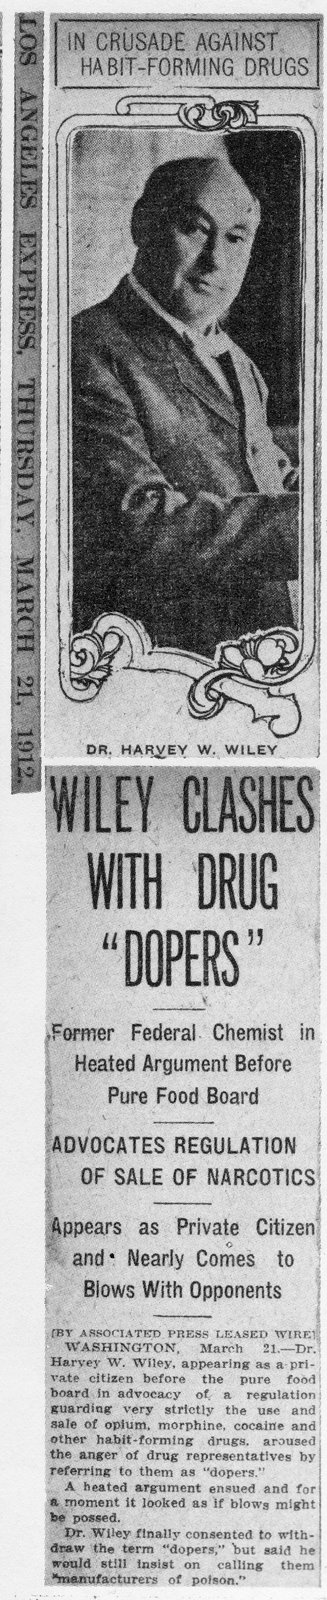 [Wiley+Clashes+With+Drug+Dopers+1280.JPG]